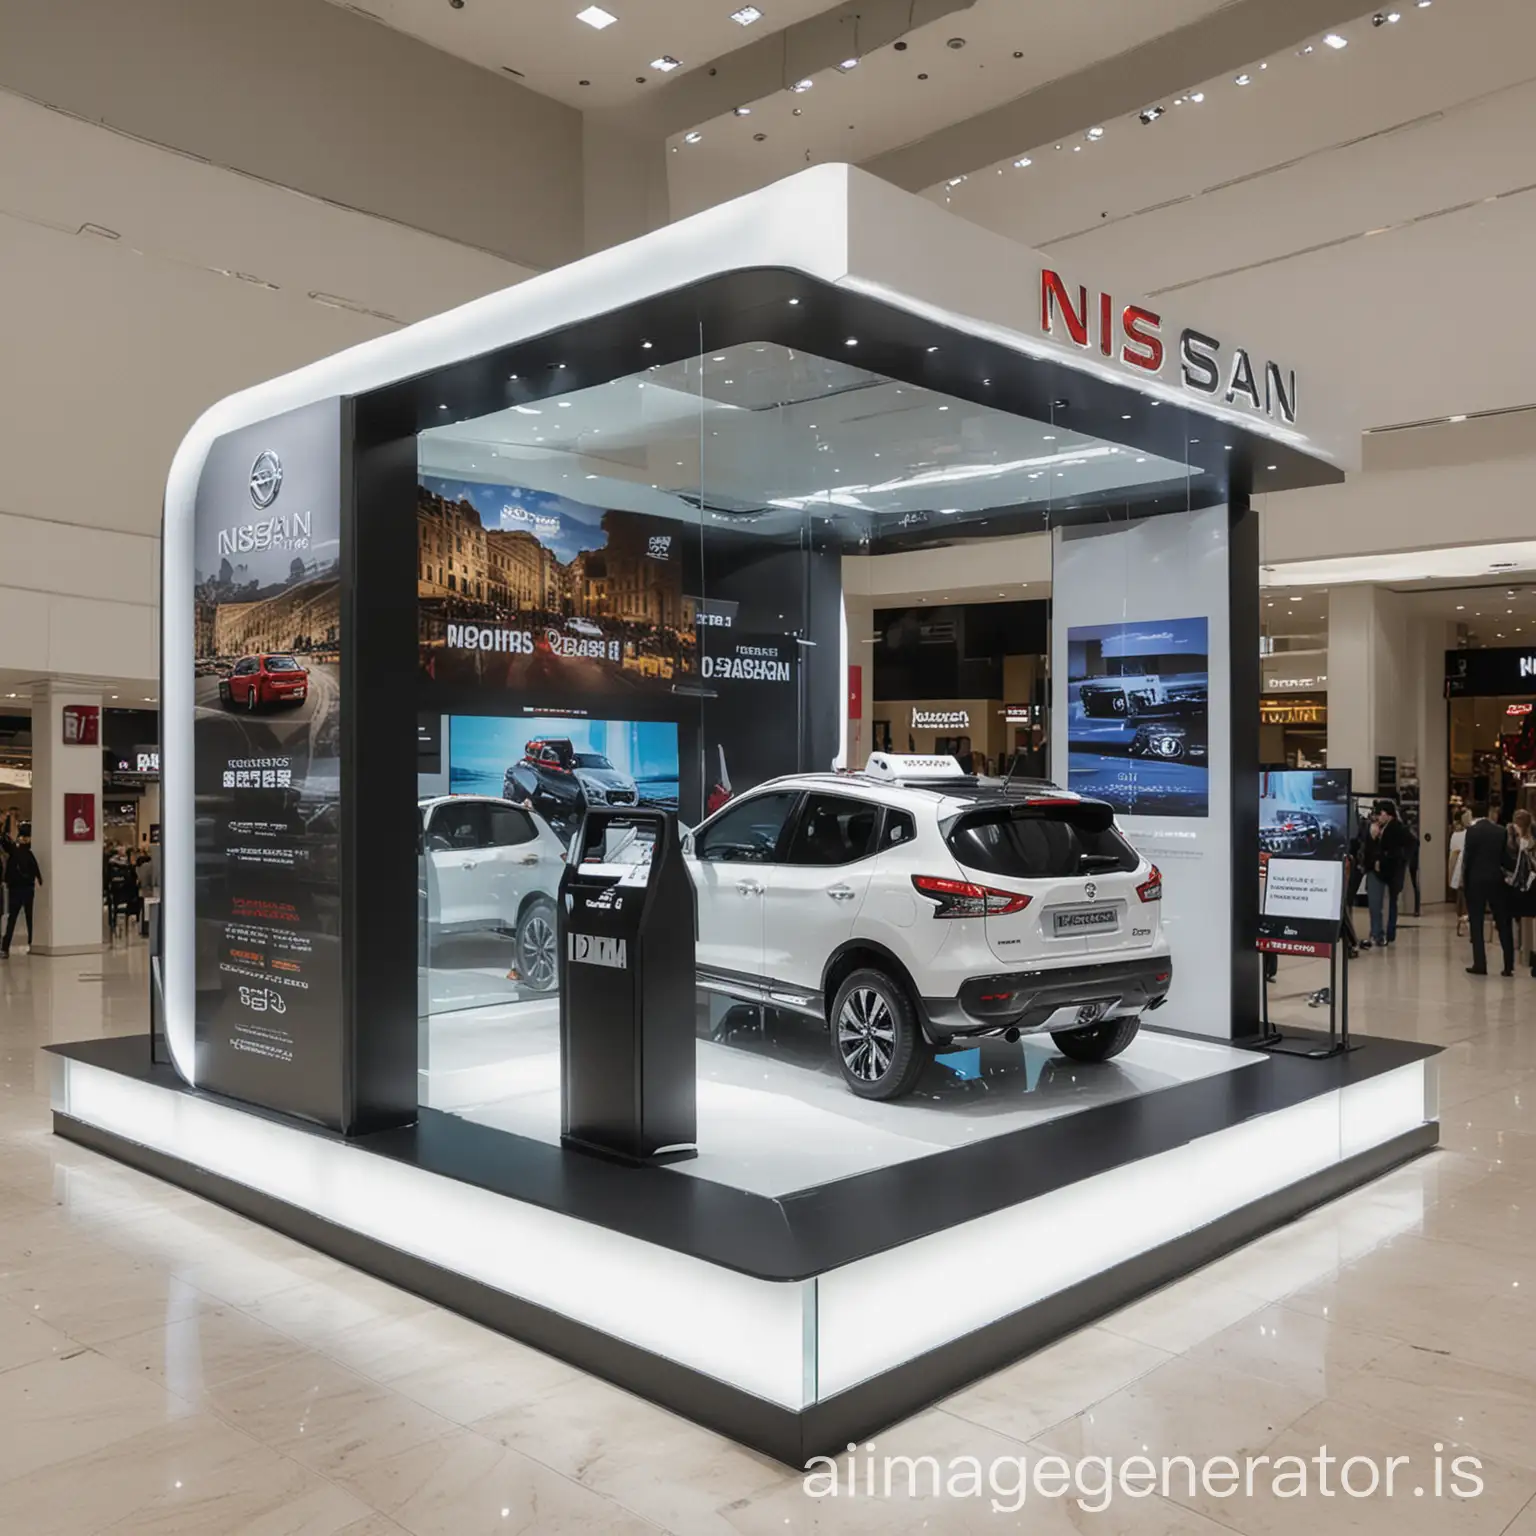  Create a booth in a shopping mall, promoting the Nissan Qashqai. Include some of the following activities and elements:• Elegant design: The booth should have an elegant and modern design that reflects the urban style of the Qashqai. Neutral colors, high-quality materials, and city-related decorative items can be used.• Interactive touchscreen: An interactive touchscreen where visitors can view information about the Qashqai, such as images, videos, and technical specifications. A game or contest can also be included for visitors to participate in.• Virtual reality zone: A small space where visitors can experience what it would be like to drive the Qashqai through the city using virtual reality technology.• Driving simulator: A driving simulator that allows visitors to experience the feeling of driving the Qashqai in different traffic situations.• Gifts and prizes: Small gifts or prizes can be offered to visitors who approach the booth, such as t-shirts, hats, or keychains.• Enthusiastic staff: The booth staff should be well-trained to answer visitors' questions and provide information about the Qashqai.